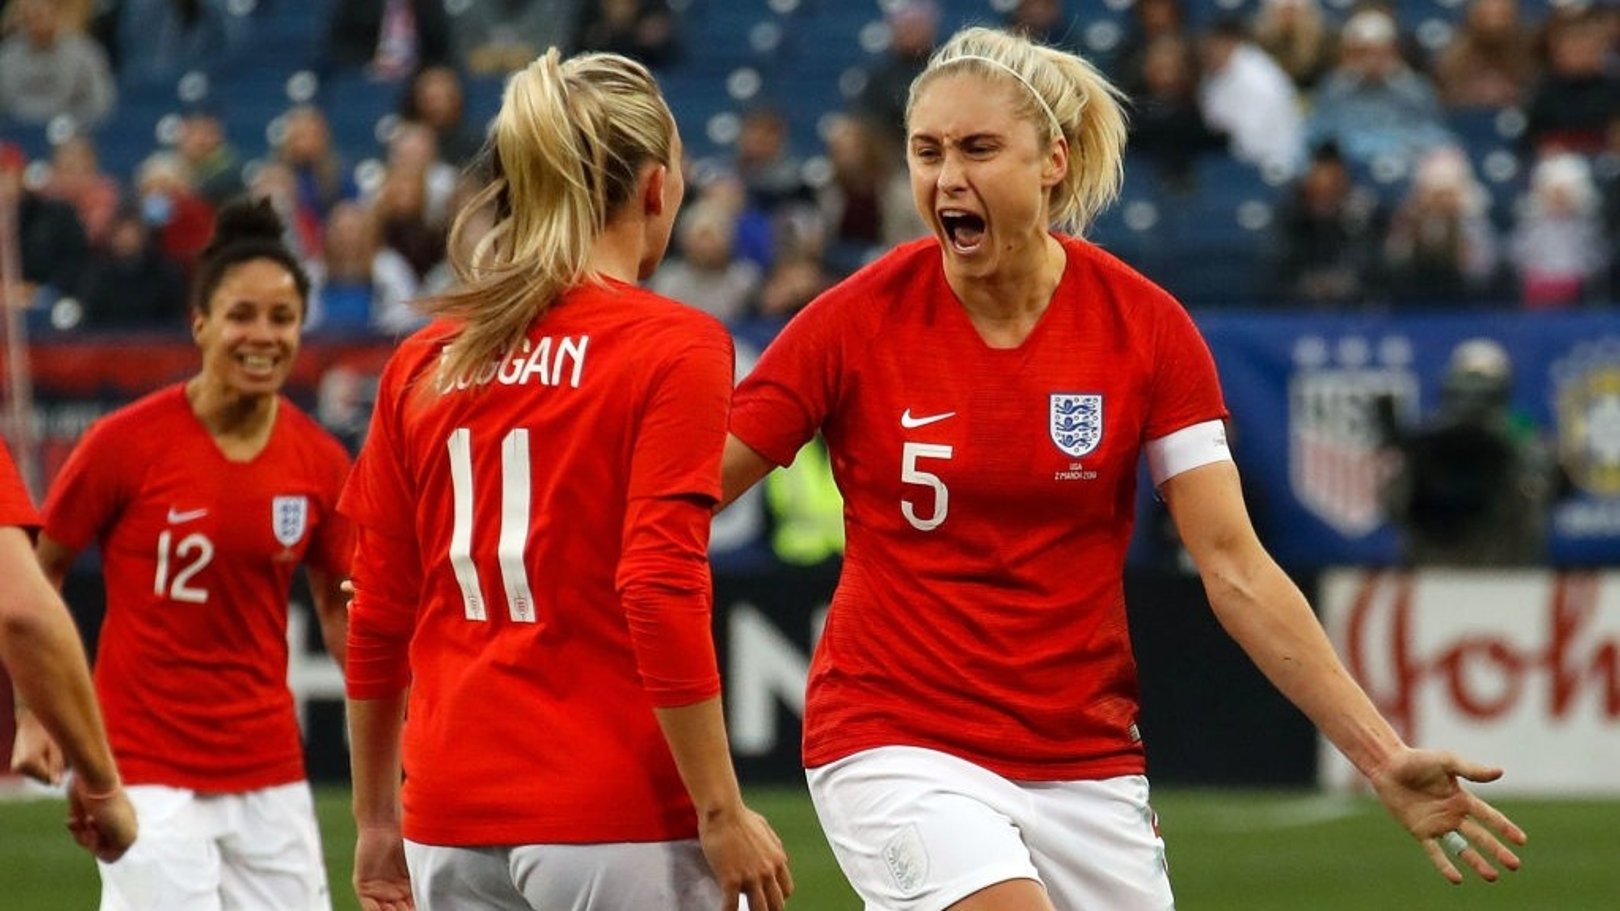 Houghton leads England to SheBelieves glory